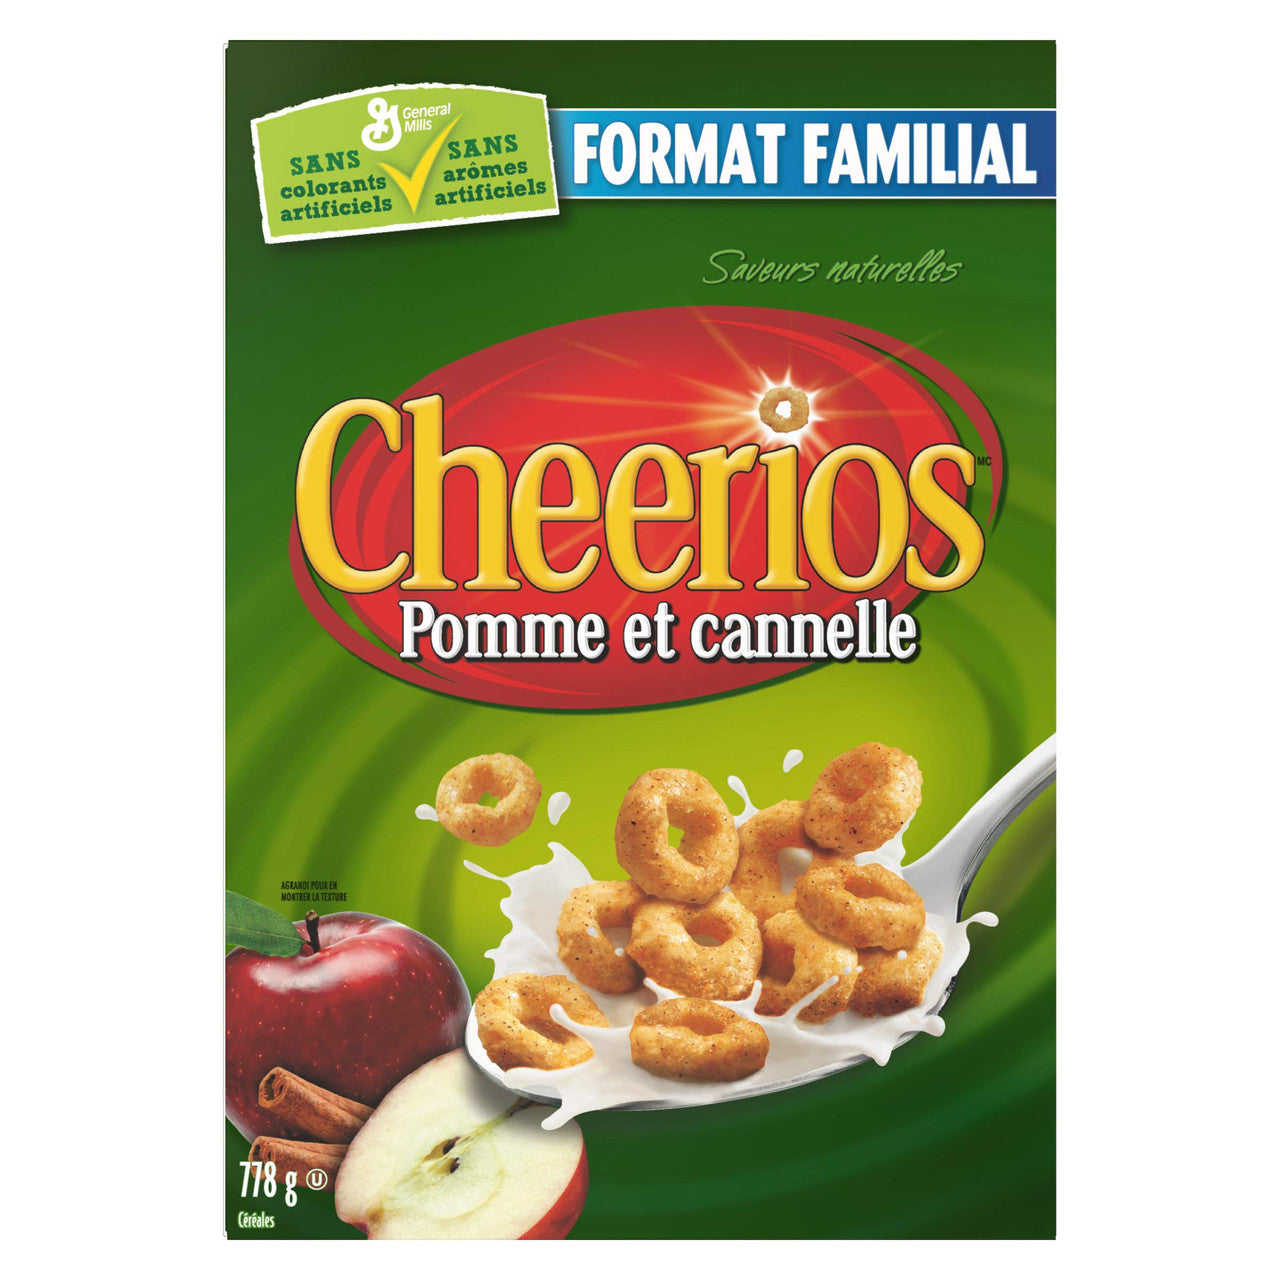 Cheerios Apple Cinnamon Naturally Flavoured Cereal Family Size, 778g/27.4oz, (Imported from Canada)